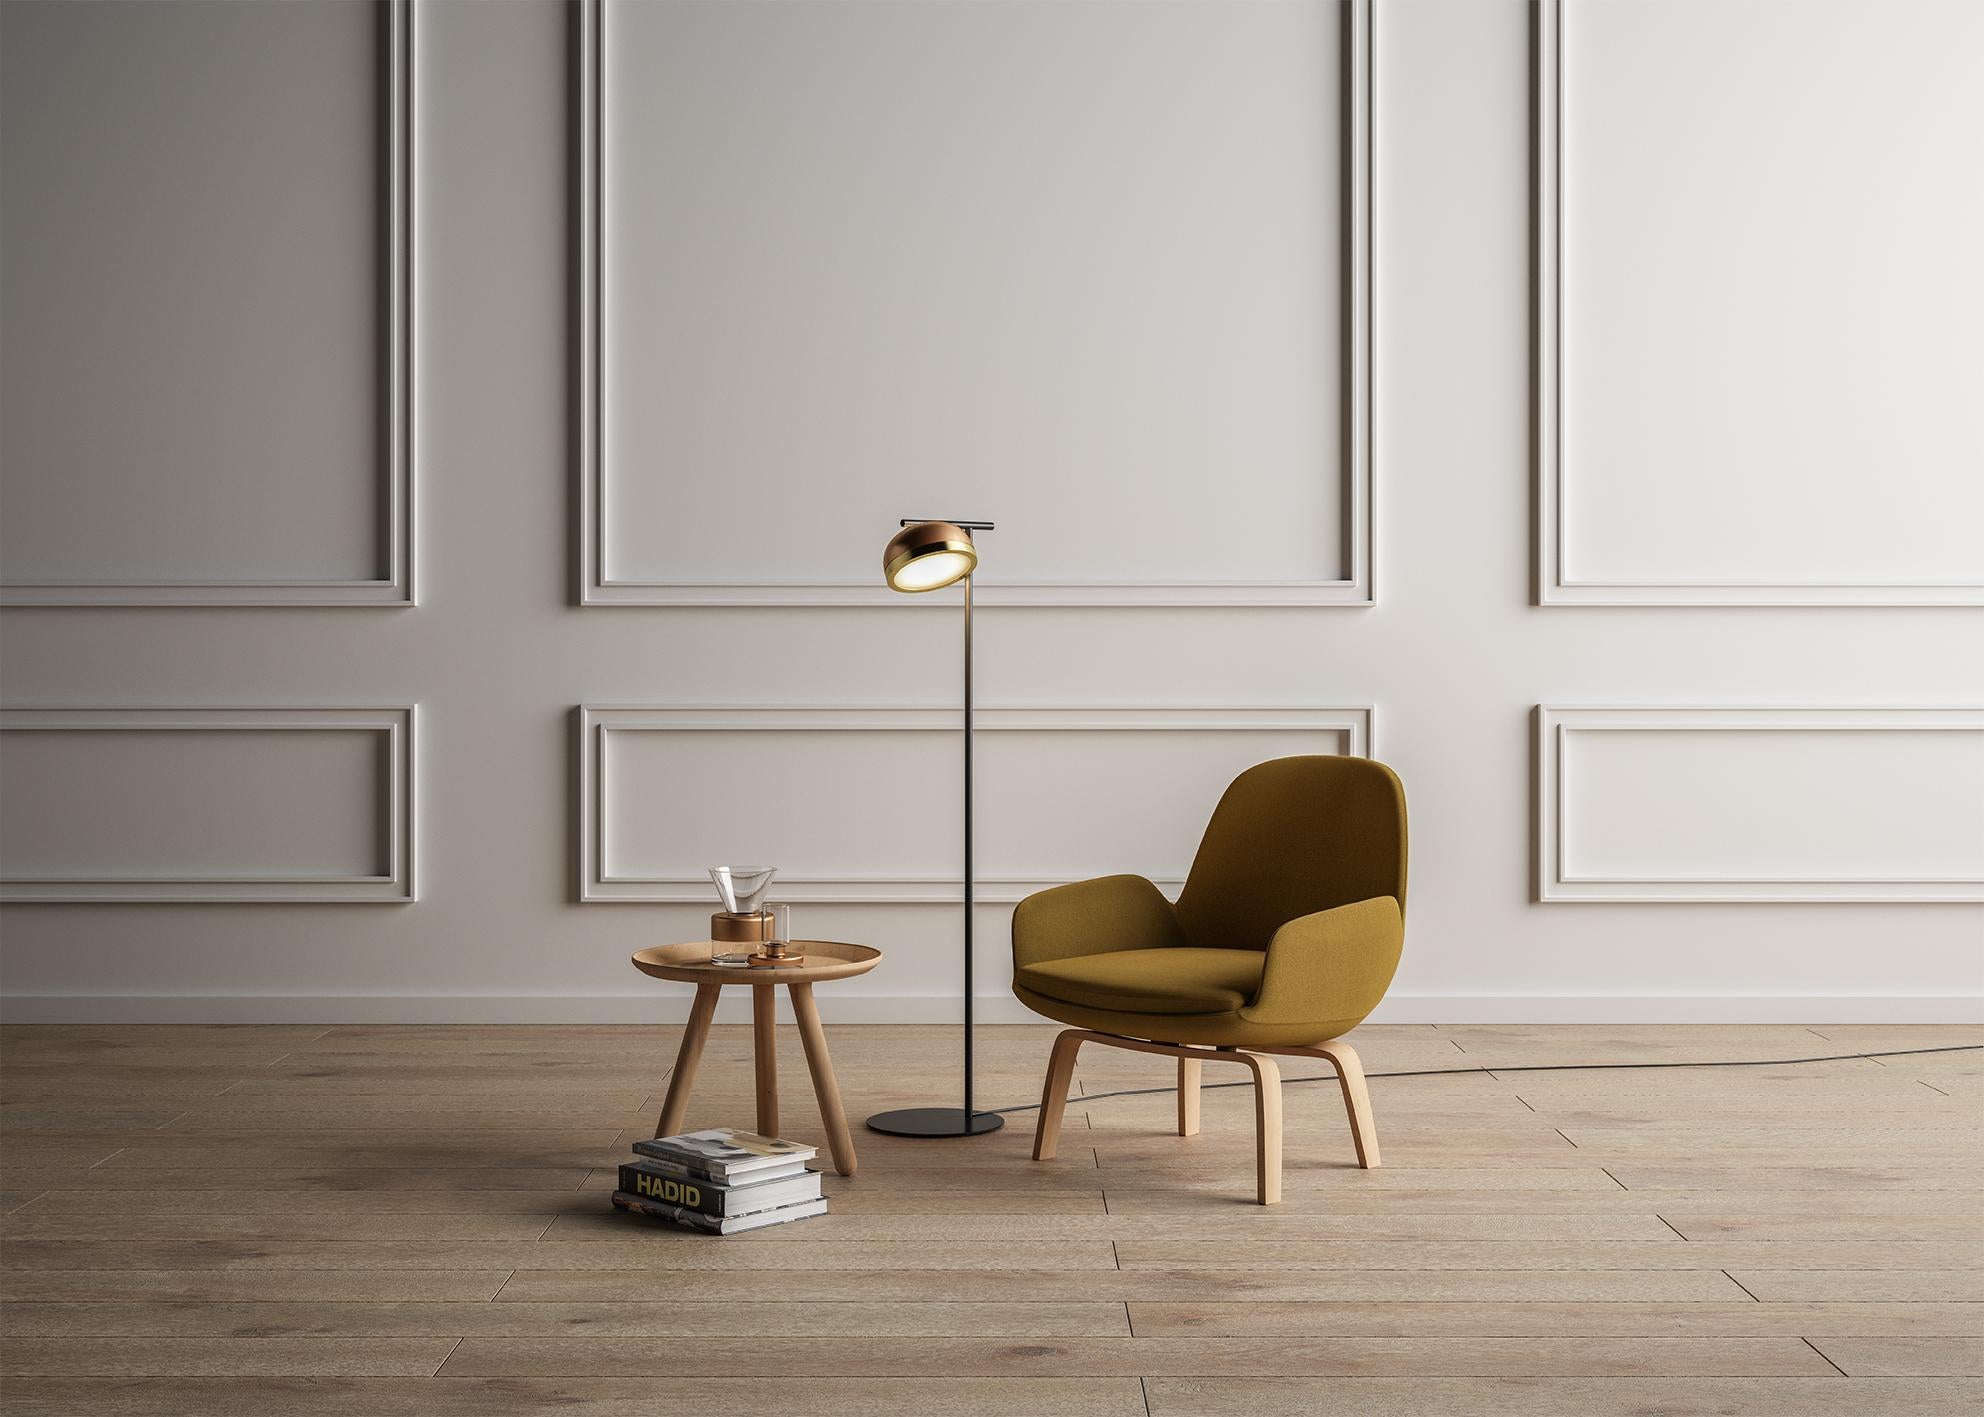 Floor Lamp Molly 556.62 by TOOY
Designer: Corrado Dotti

Model shown: Metal Dome C74 + Brushed brass Ring
Dimensions: H. 130 x D. 20 cm
Source light: 1 x LED 220/240V , 1200 lumens,  12W Compliant with USA electric system
Adjustable direct light